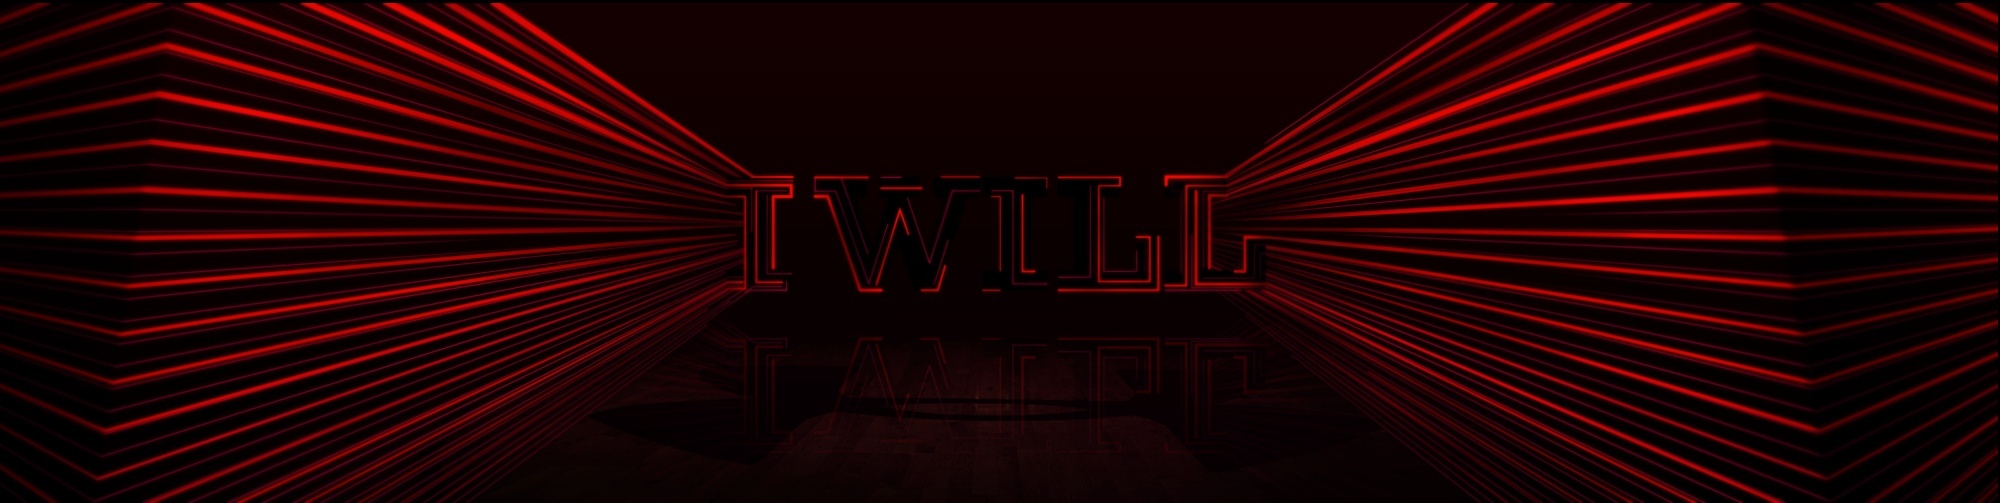 Exploration of light used to create typography, with red lines making up the words " I will"